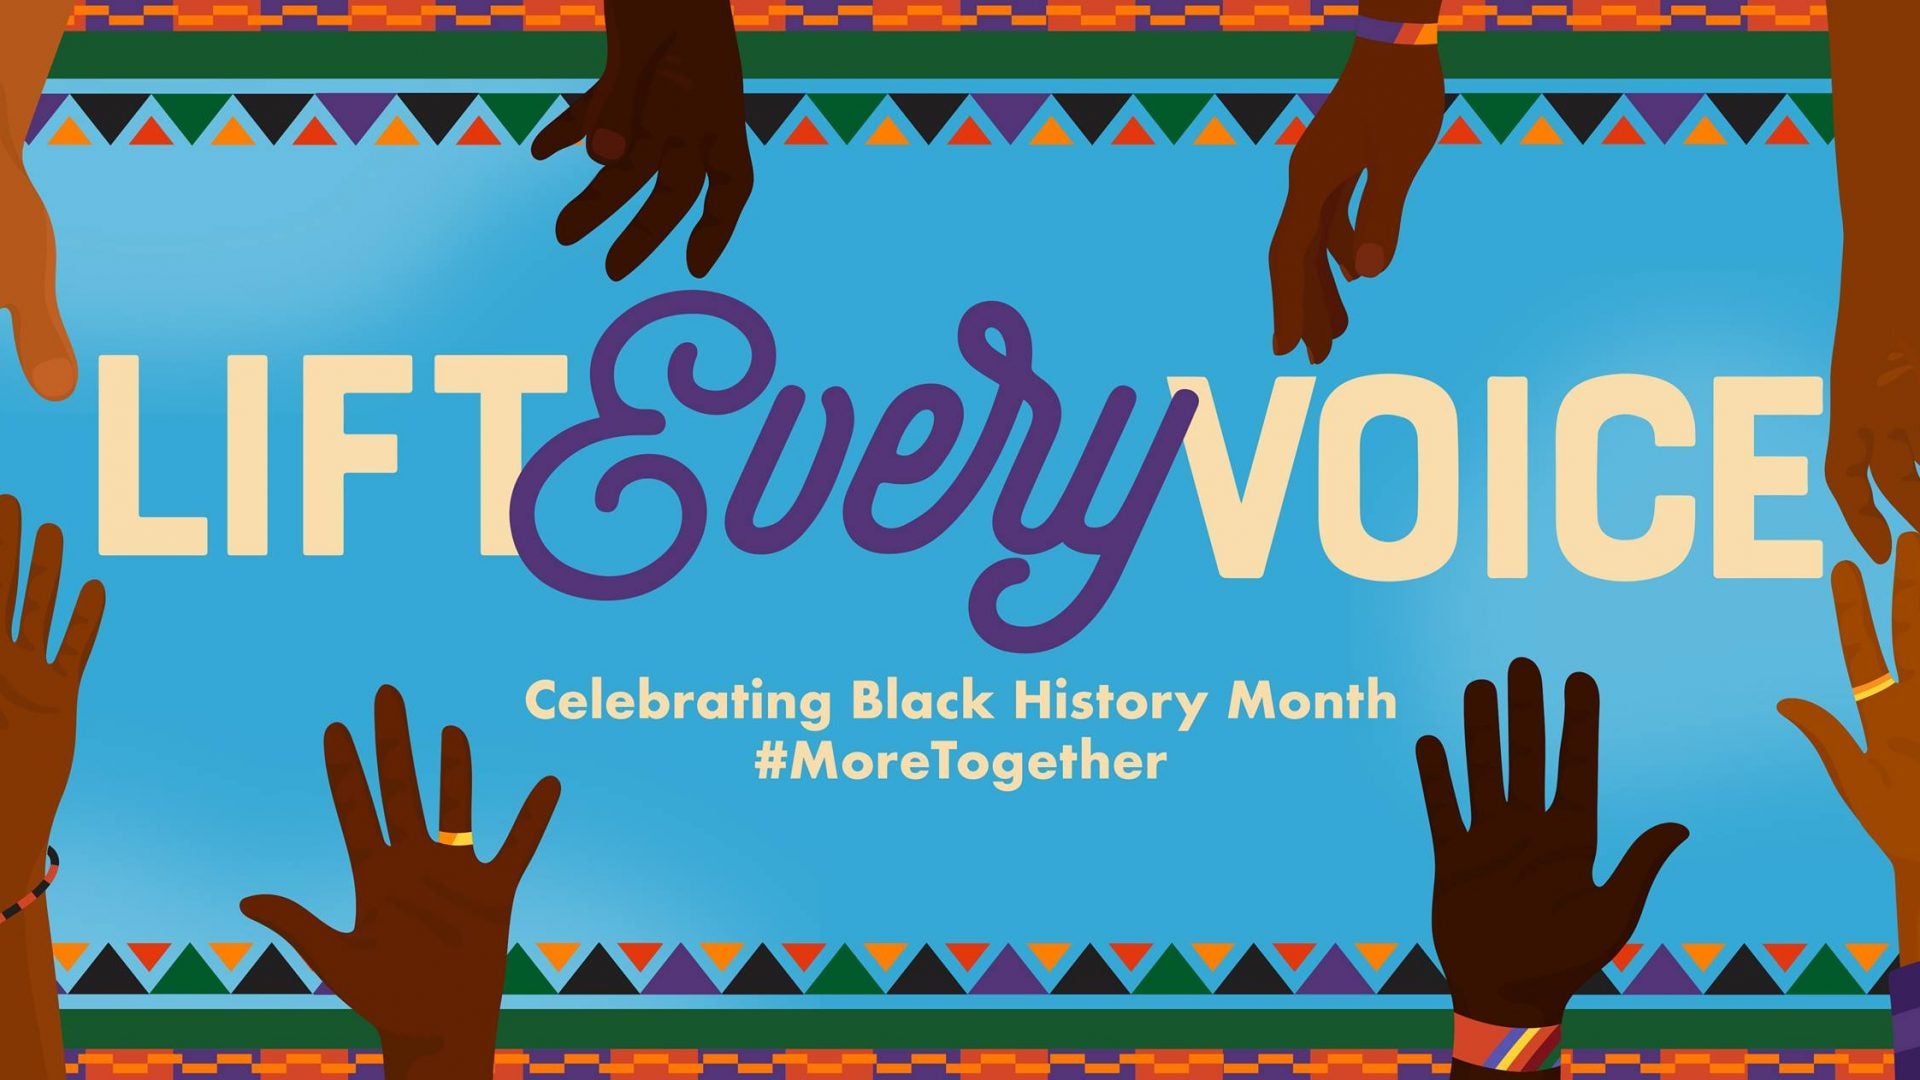 Facebook Honors Black History Month With Its ‘Lift Every Voice’ Content Series